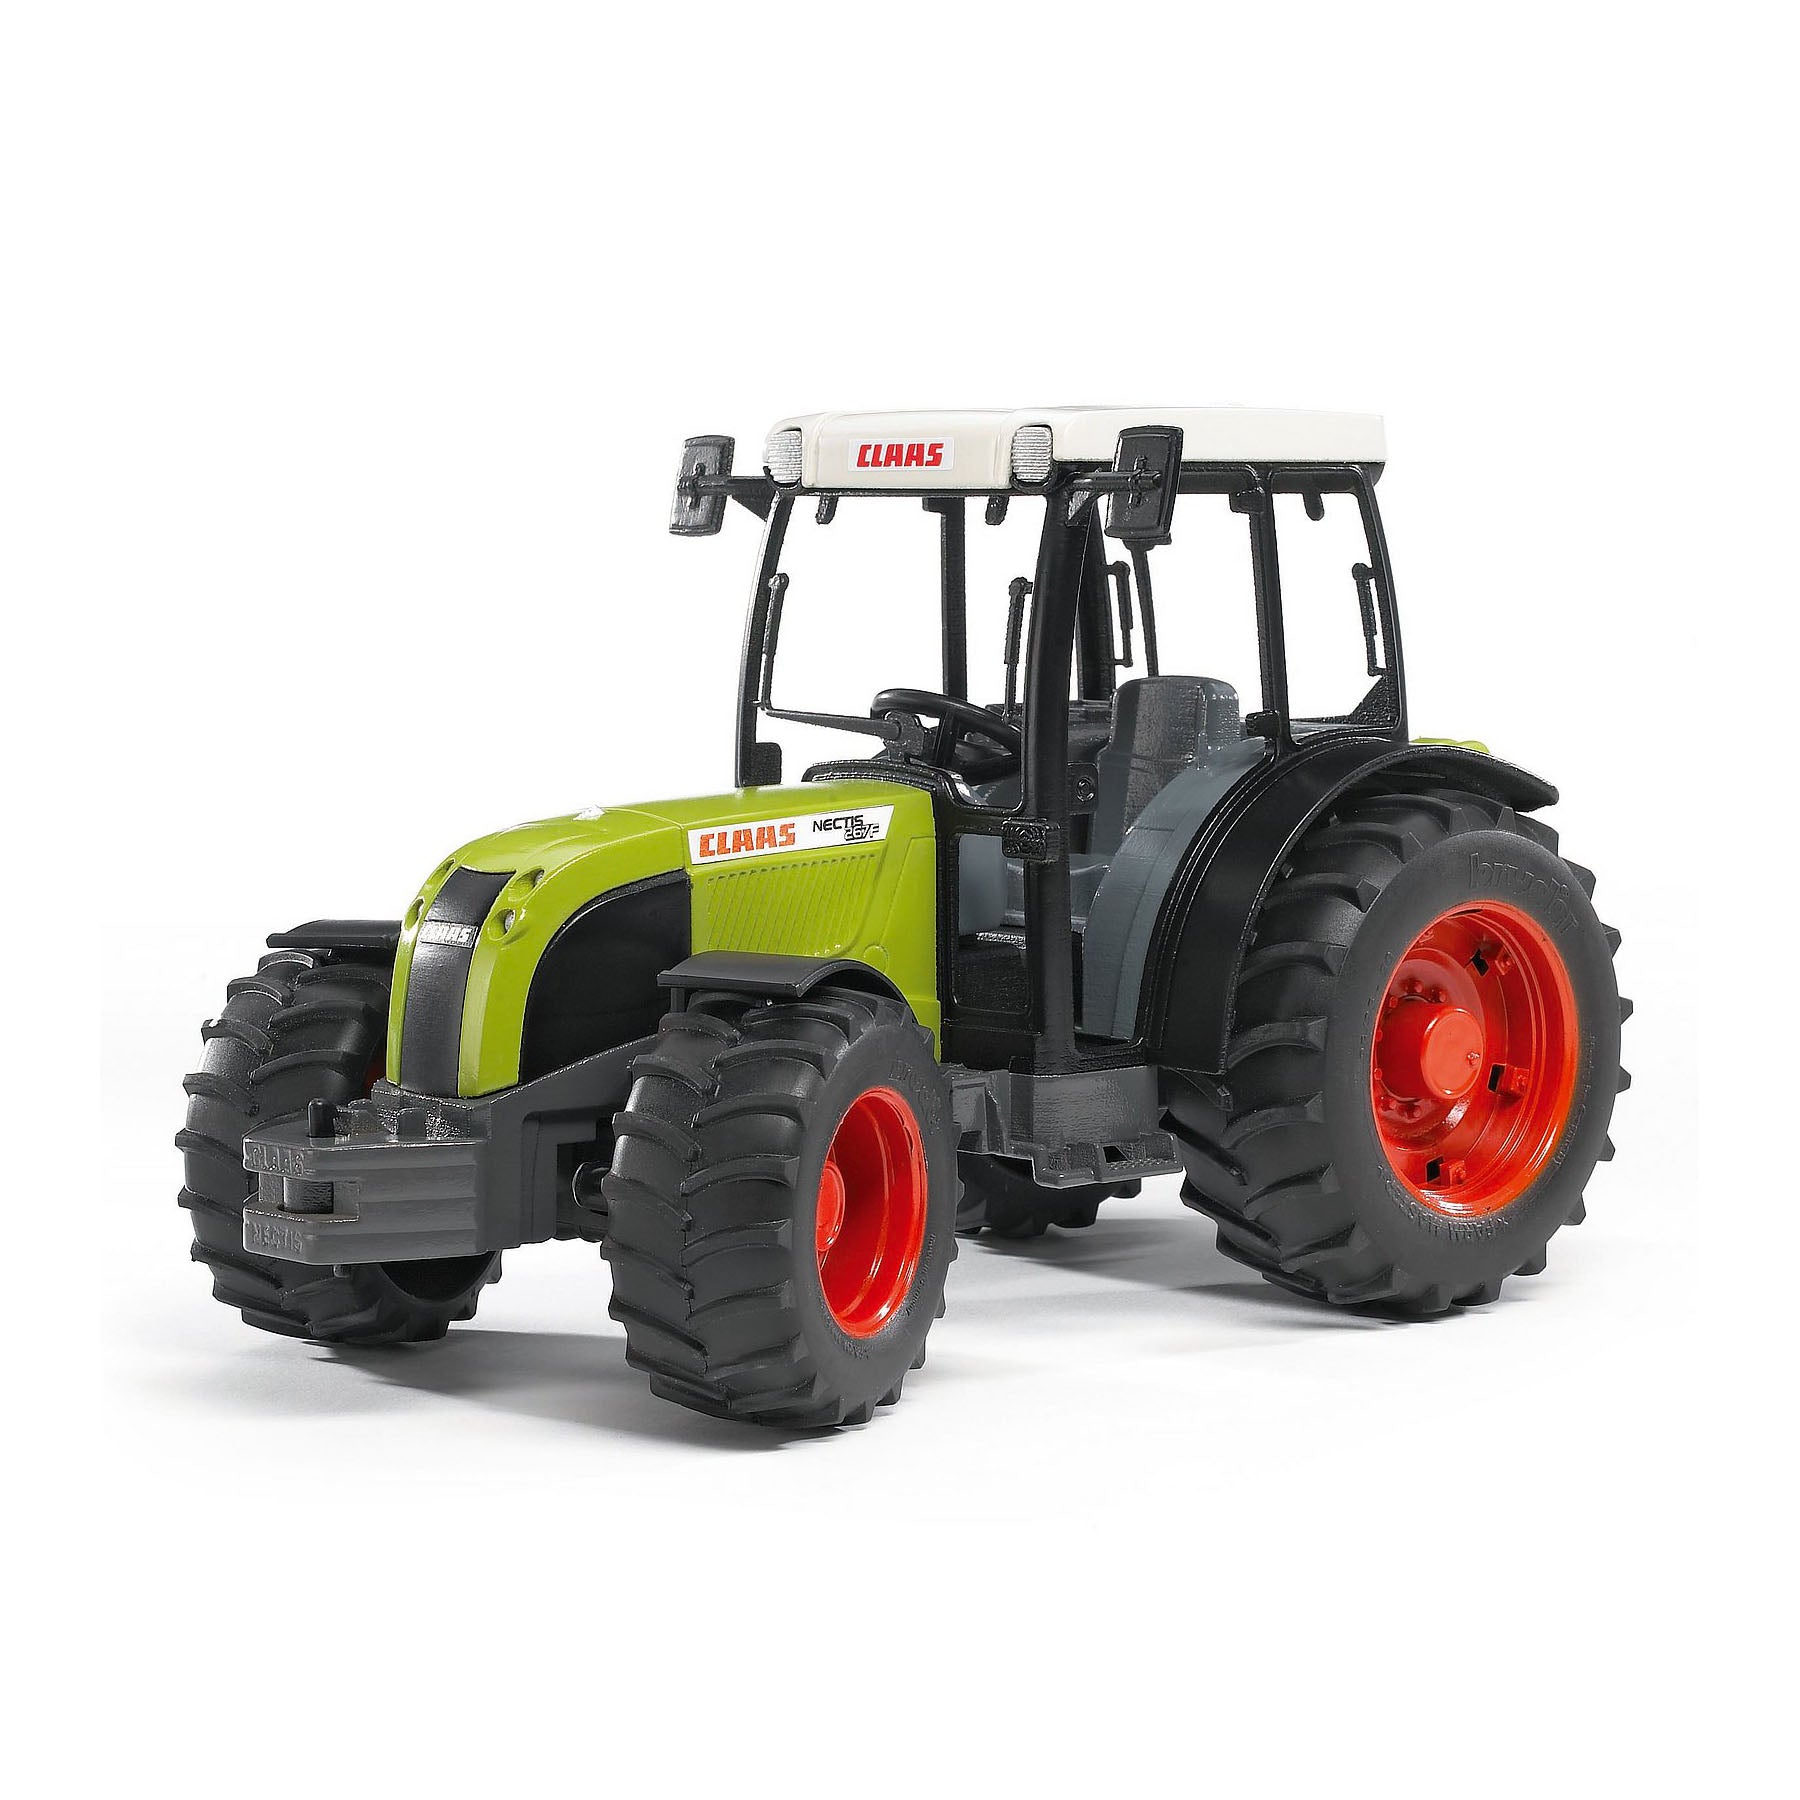 Bruder 02110 1/16 Claas Nectis 267 F Tractor